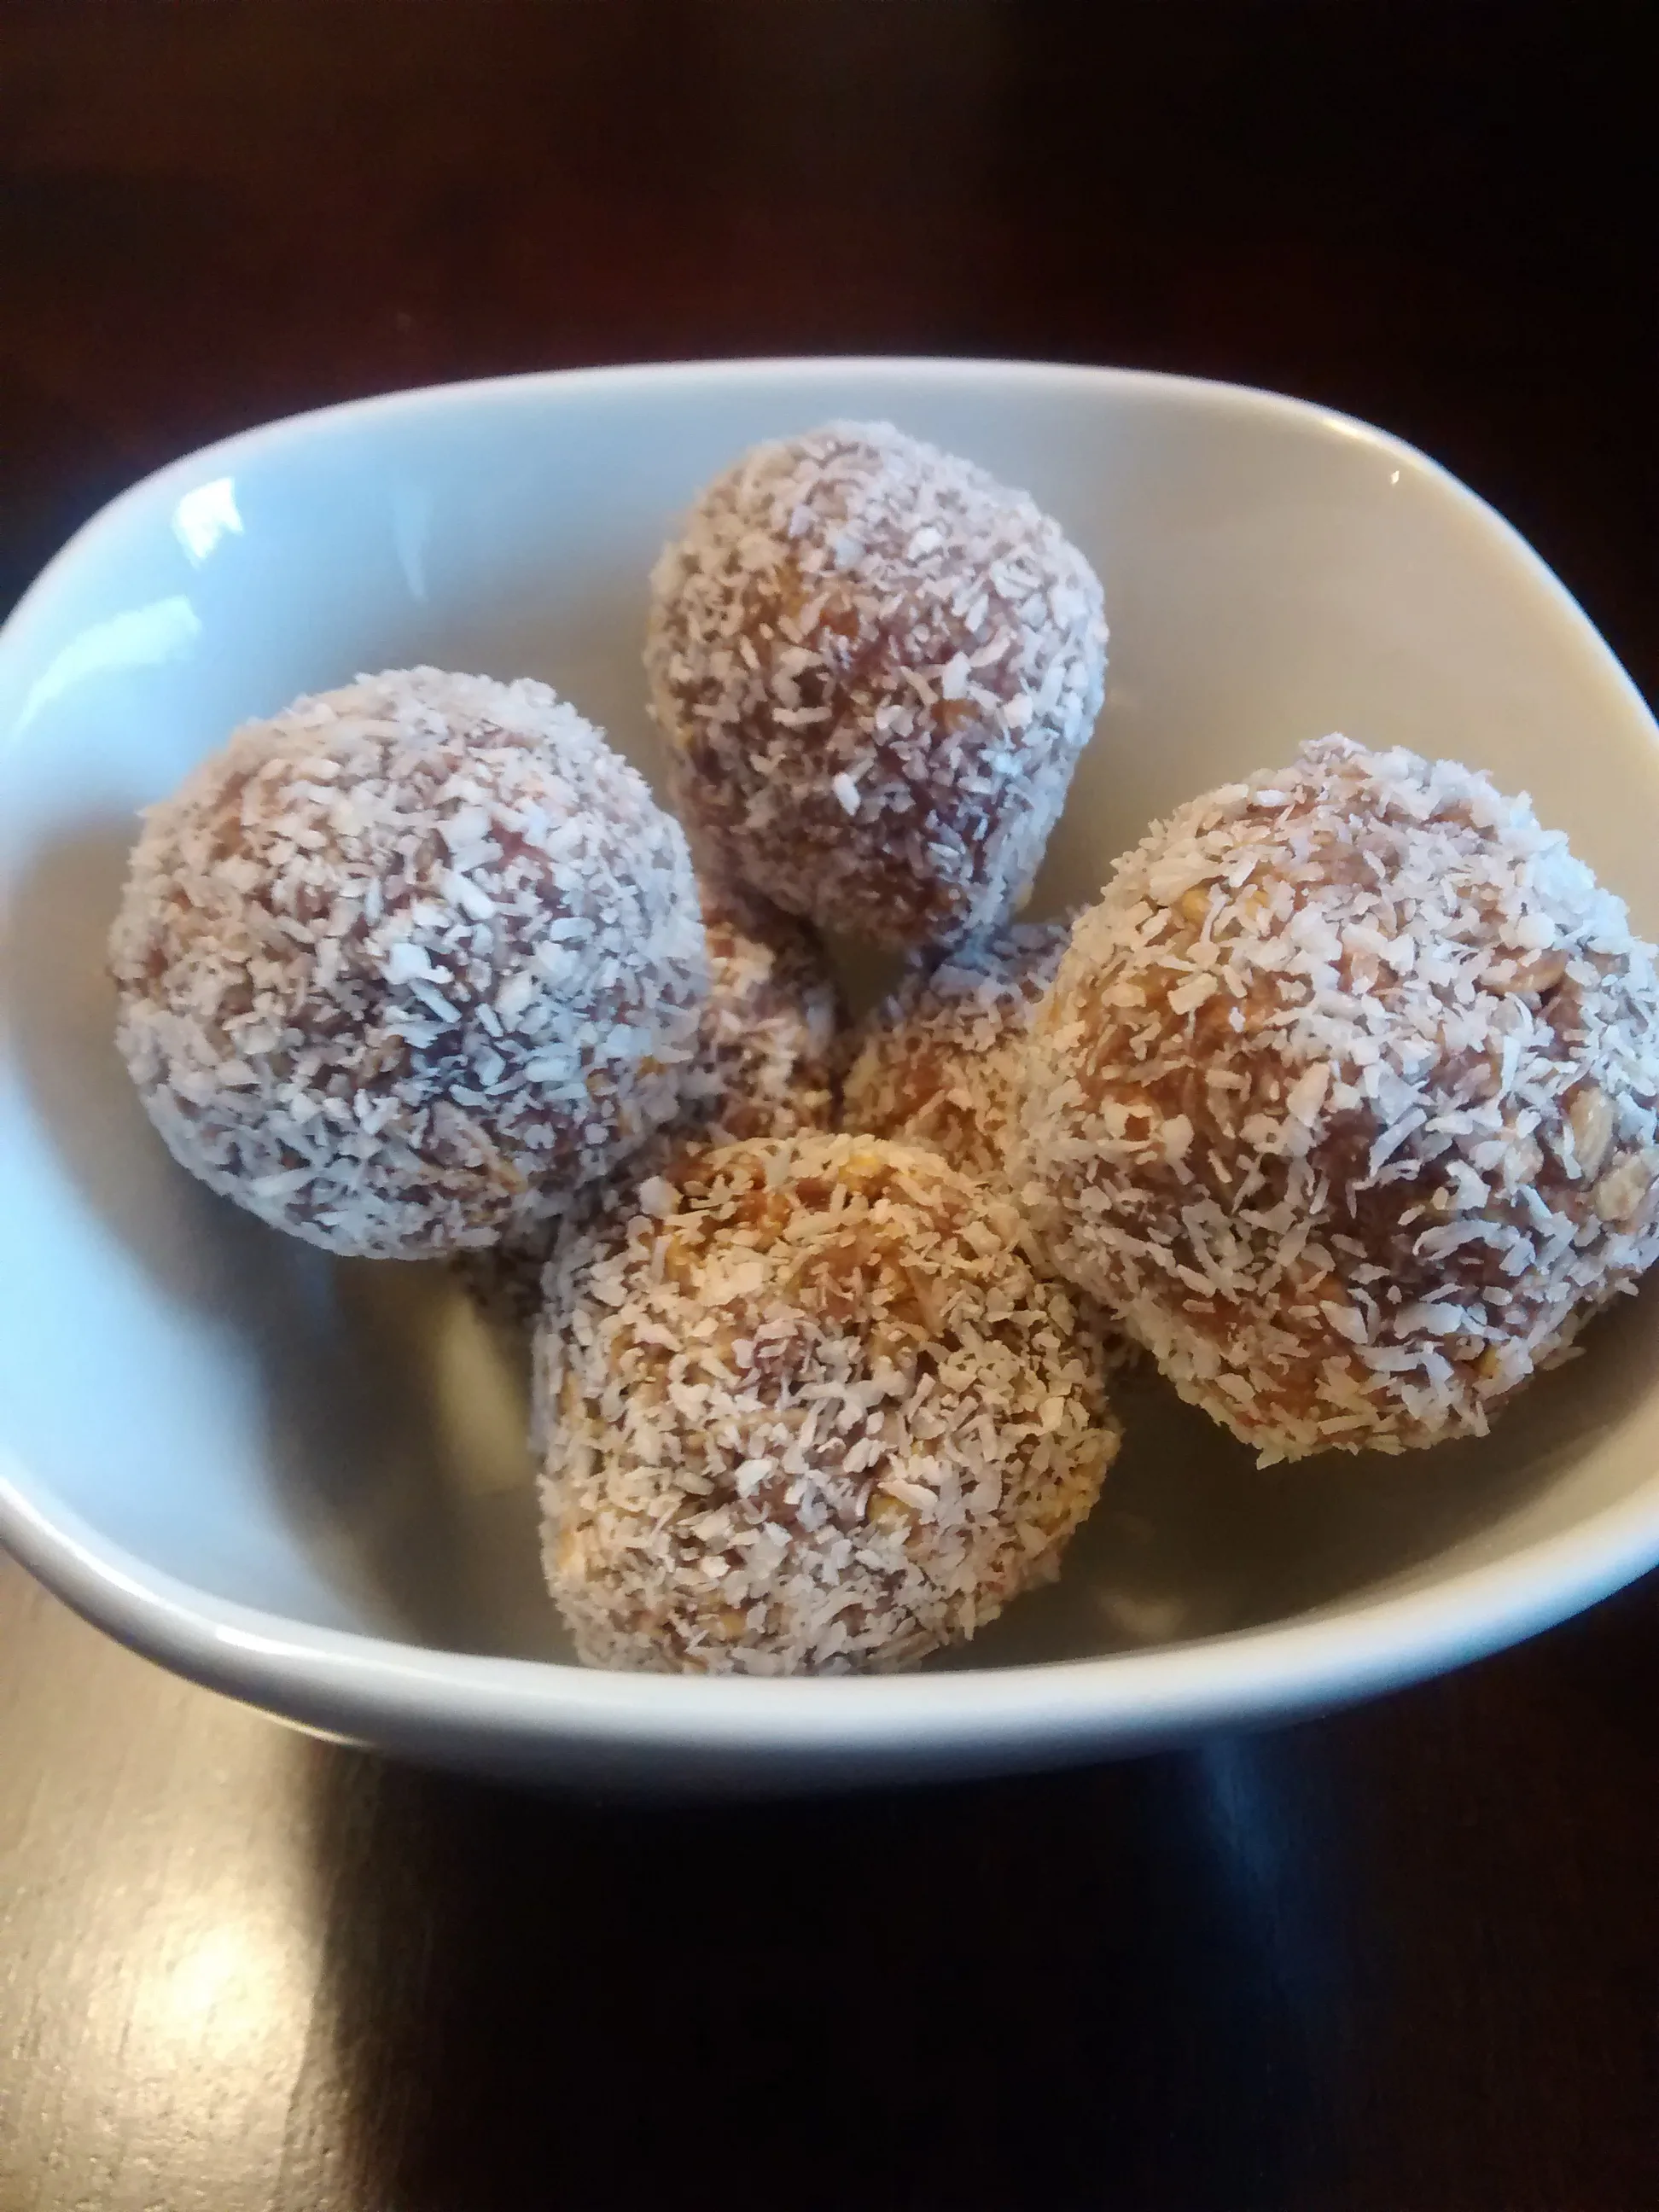 Snowball Cookies rolled in flaked coconut and piled in a white ceramic bowl